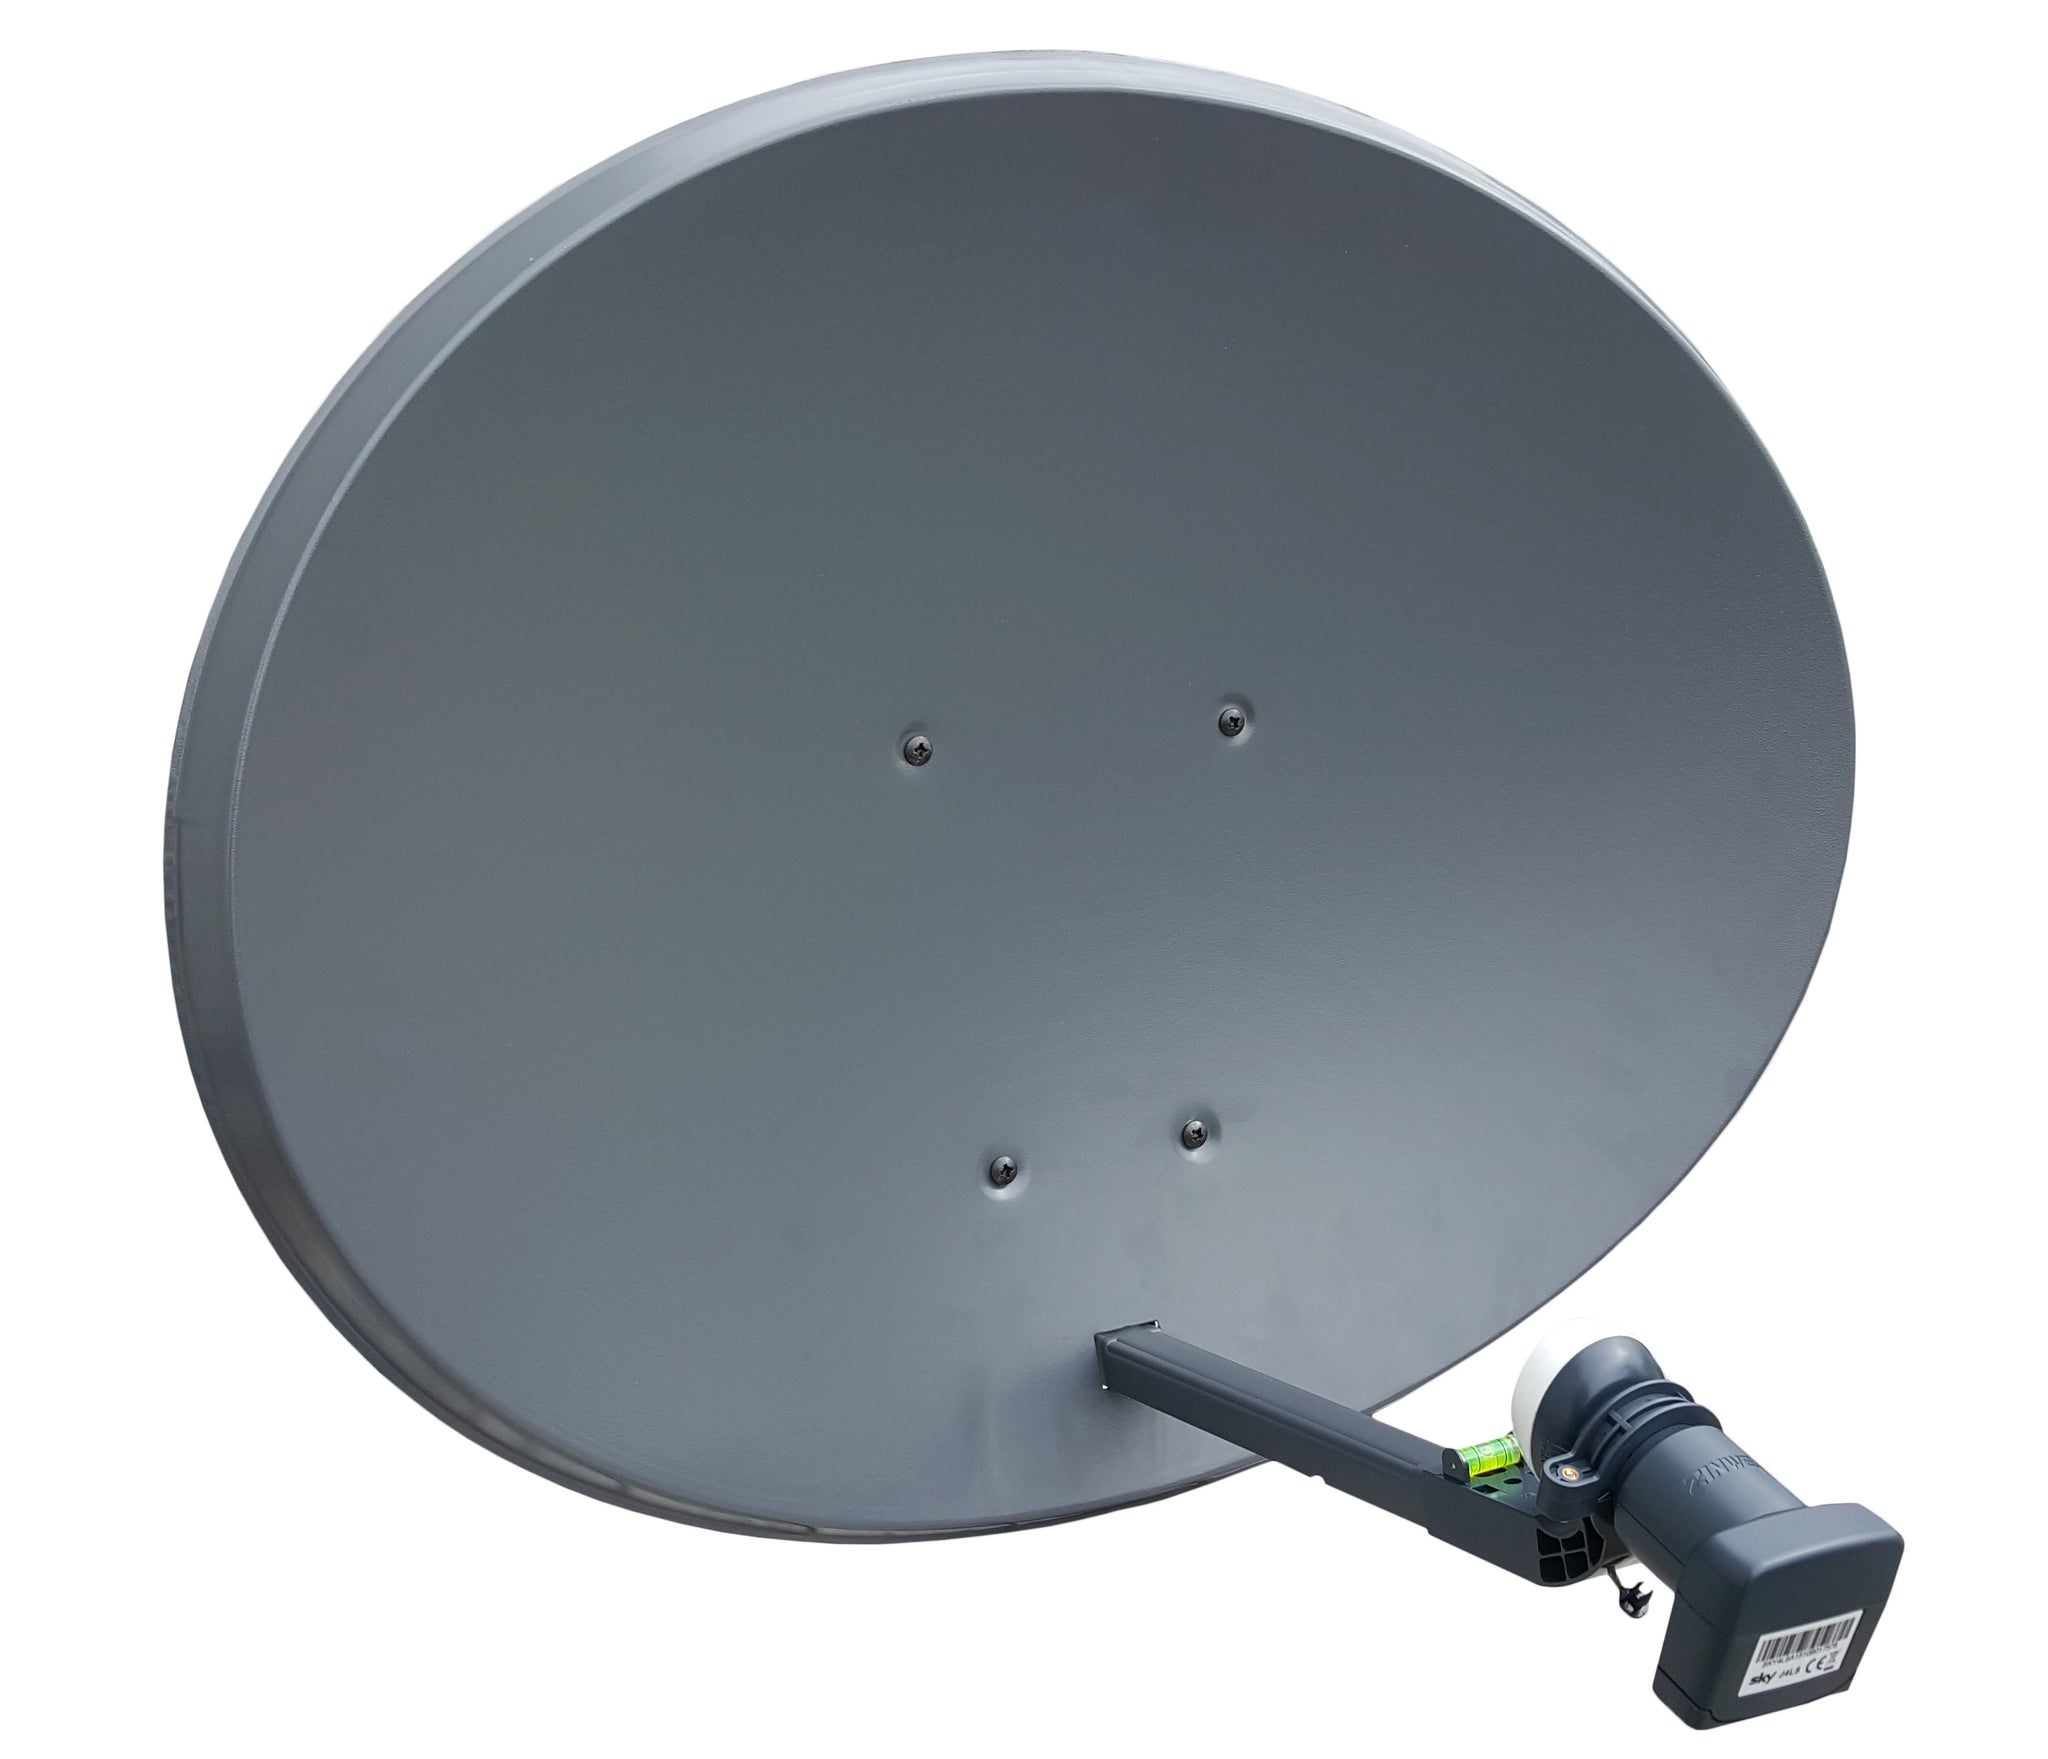 SOLID SKY Zone 2 Dish & Wall Mount MK4 BOXED